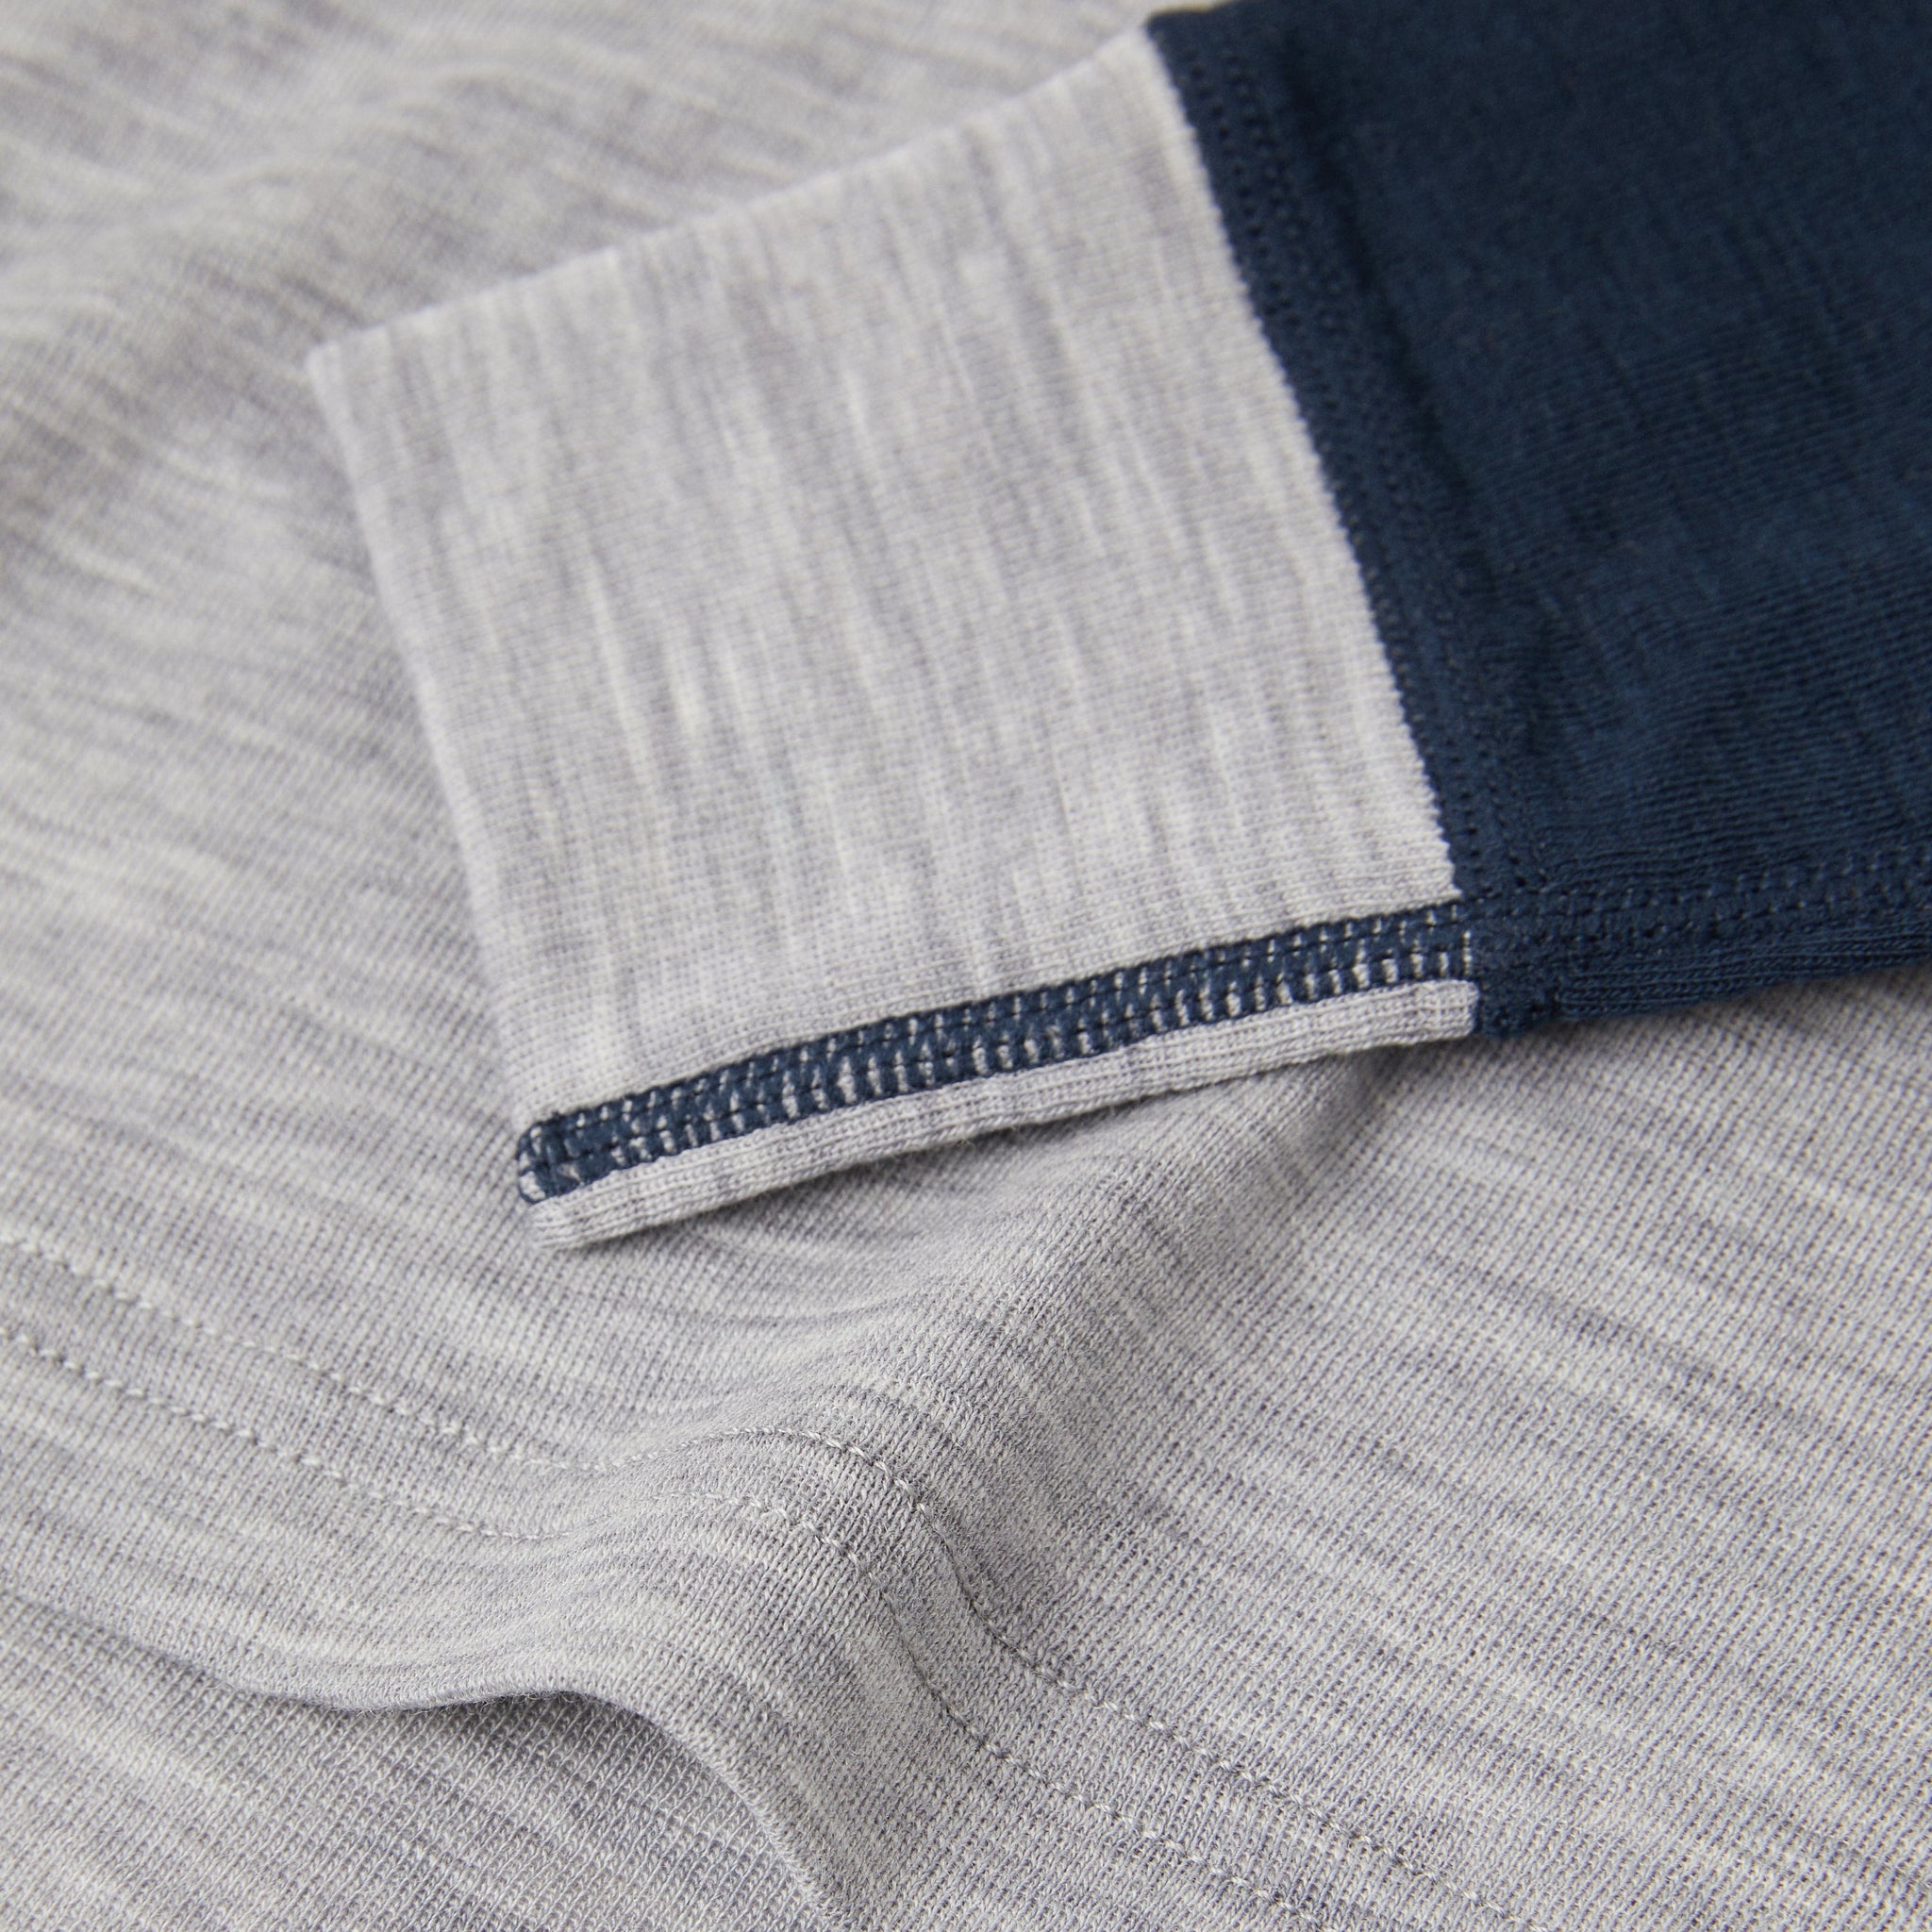 Merino Wool Grey Thermal Kids Top from the Polarn O. Pyret kidswear collection. The best ethical kids outerwear.